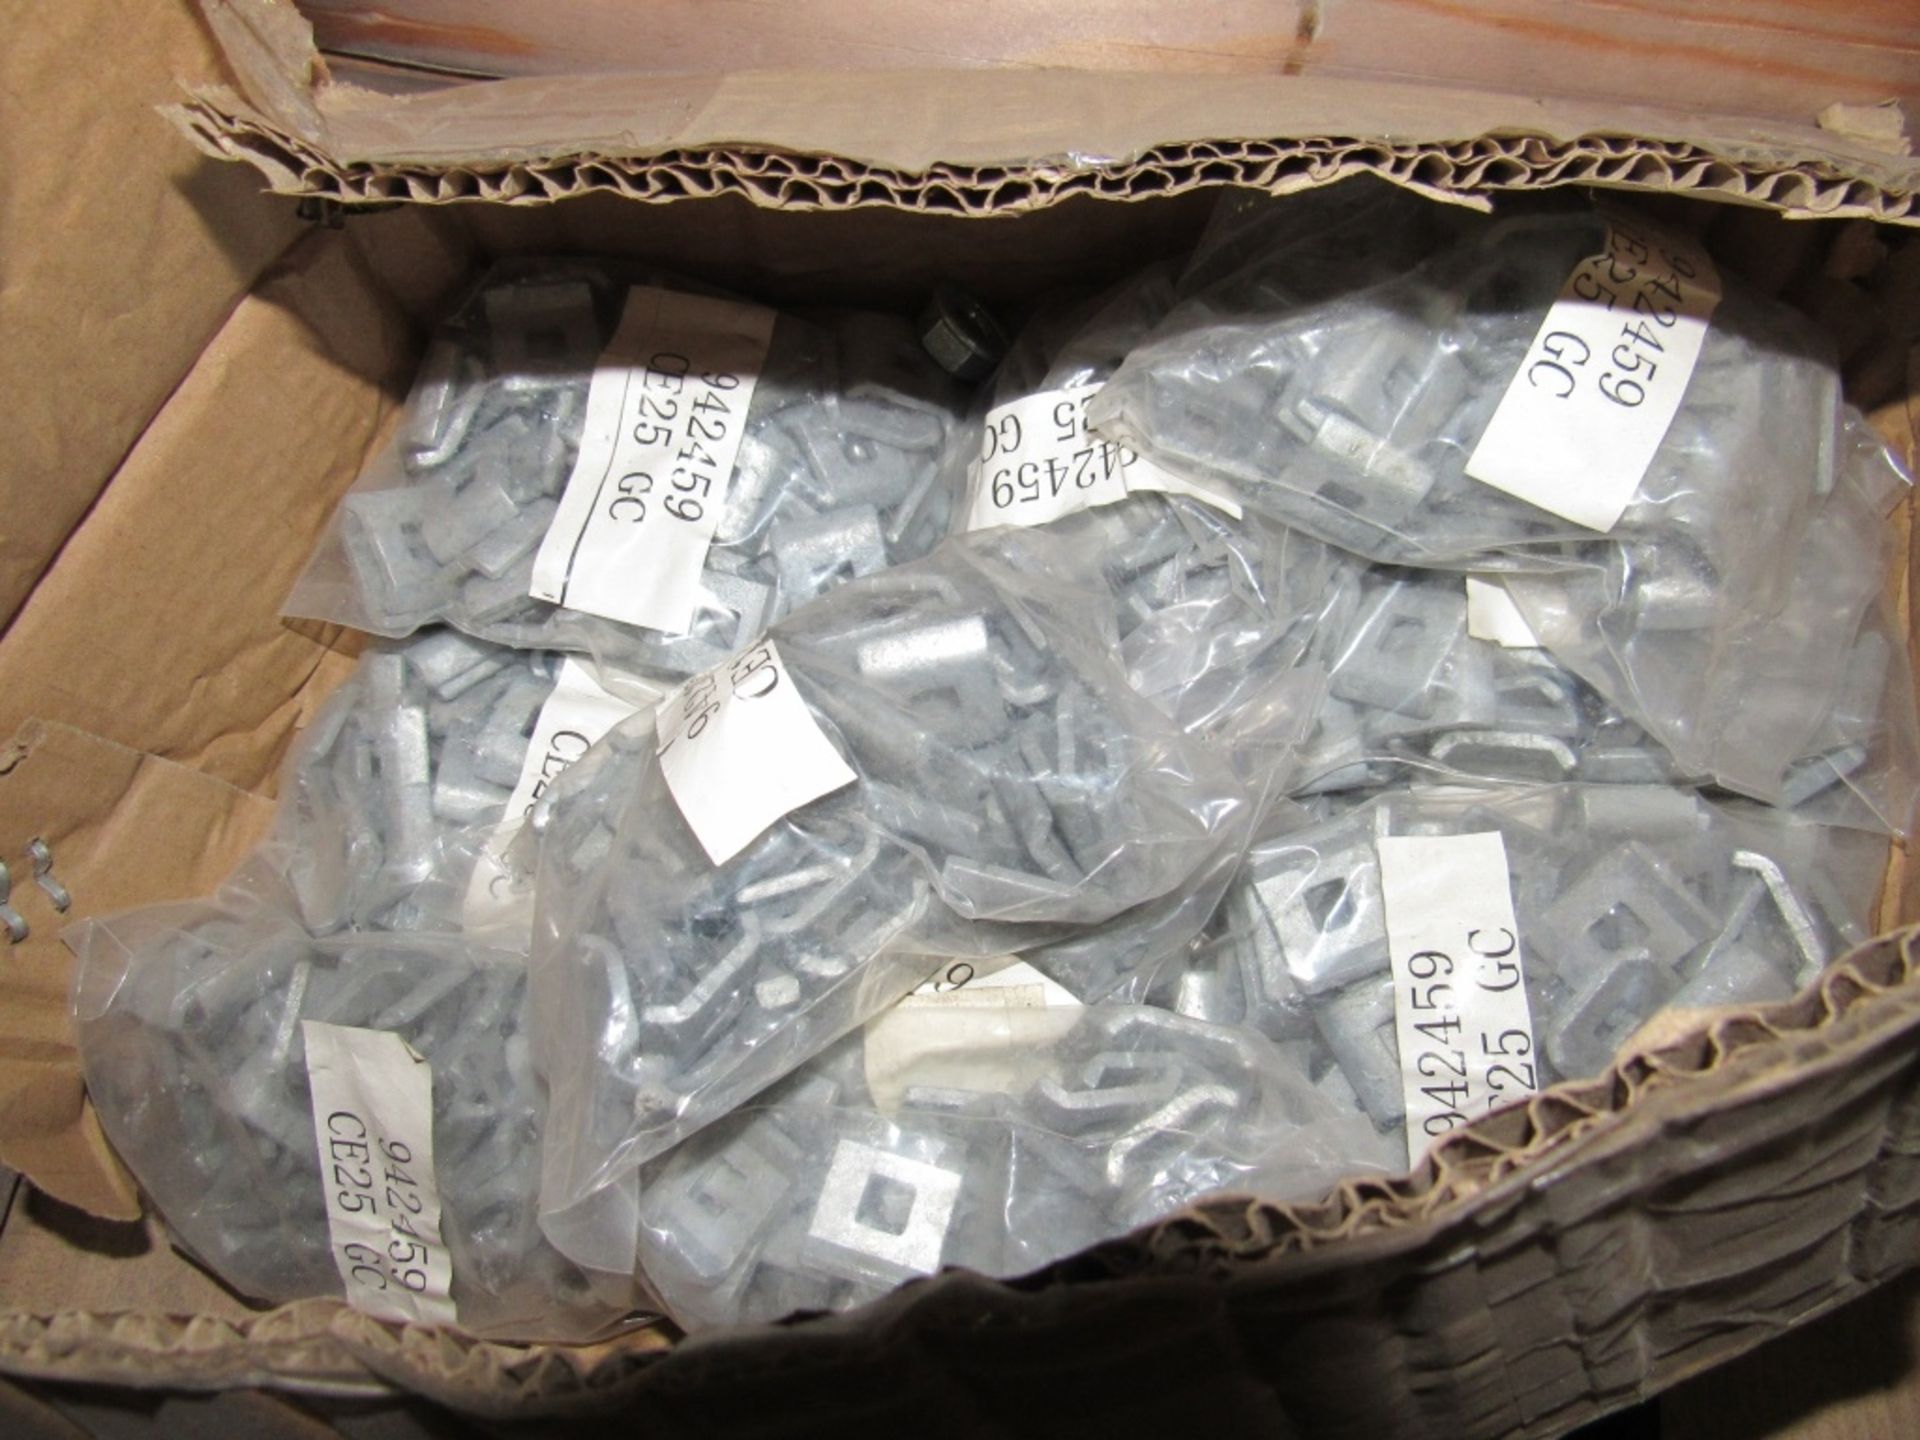 Assorted Washers- ***Located in Cleveland, TN*** MFR - Acroba (approx 2,000) Washers 2" - Image 7 of 7